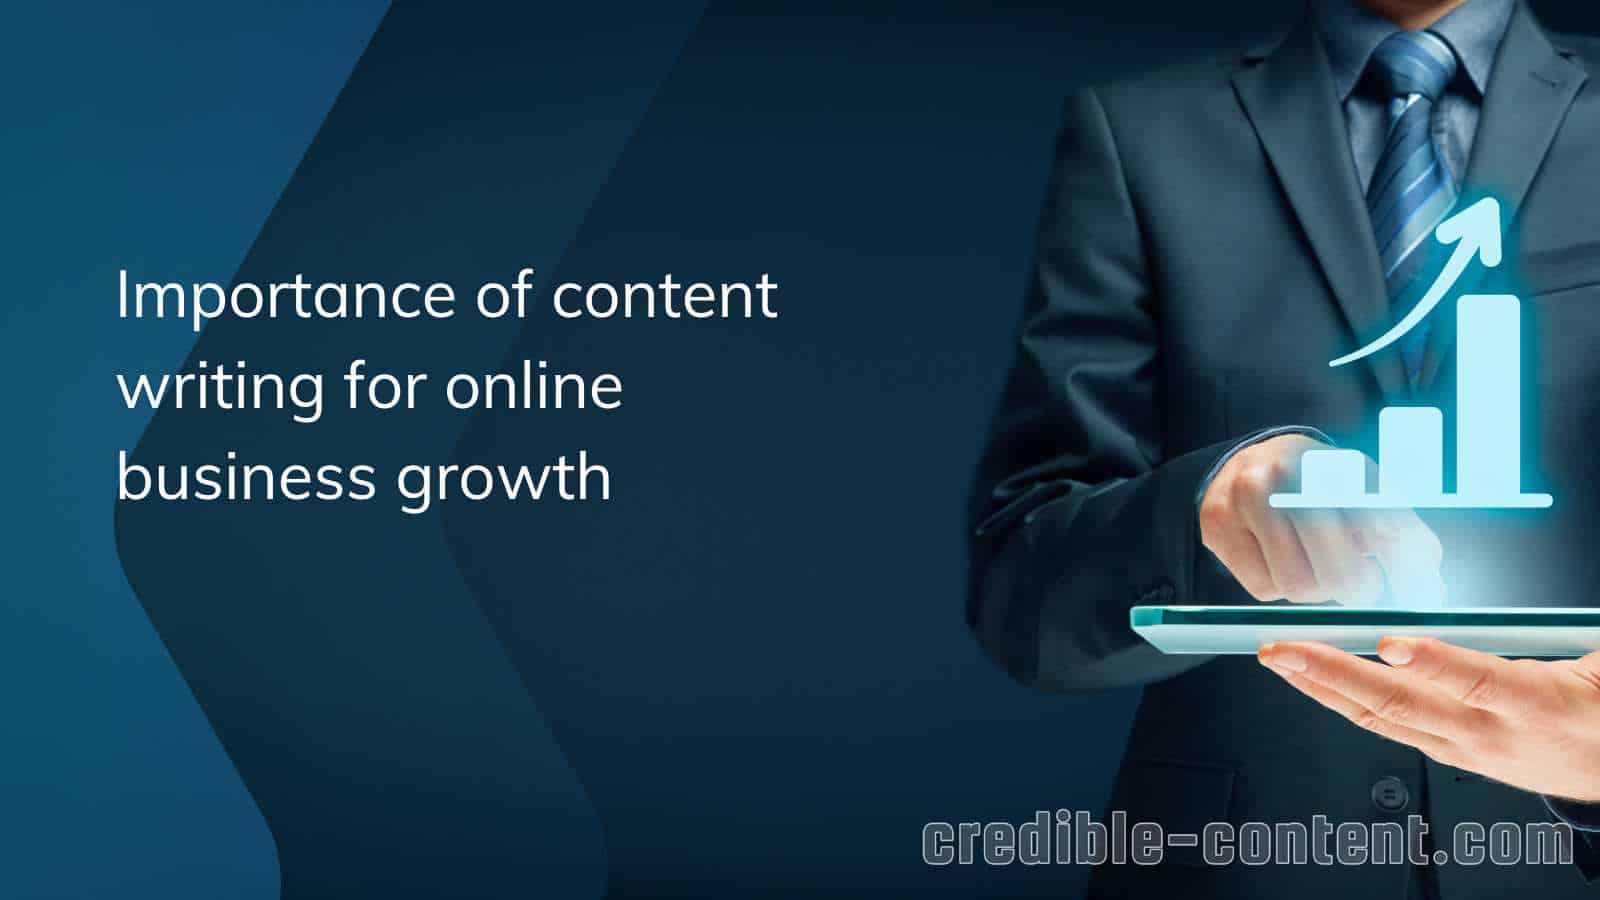 Importance of content writing for online business growth